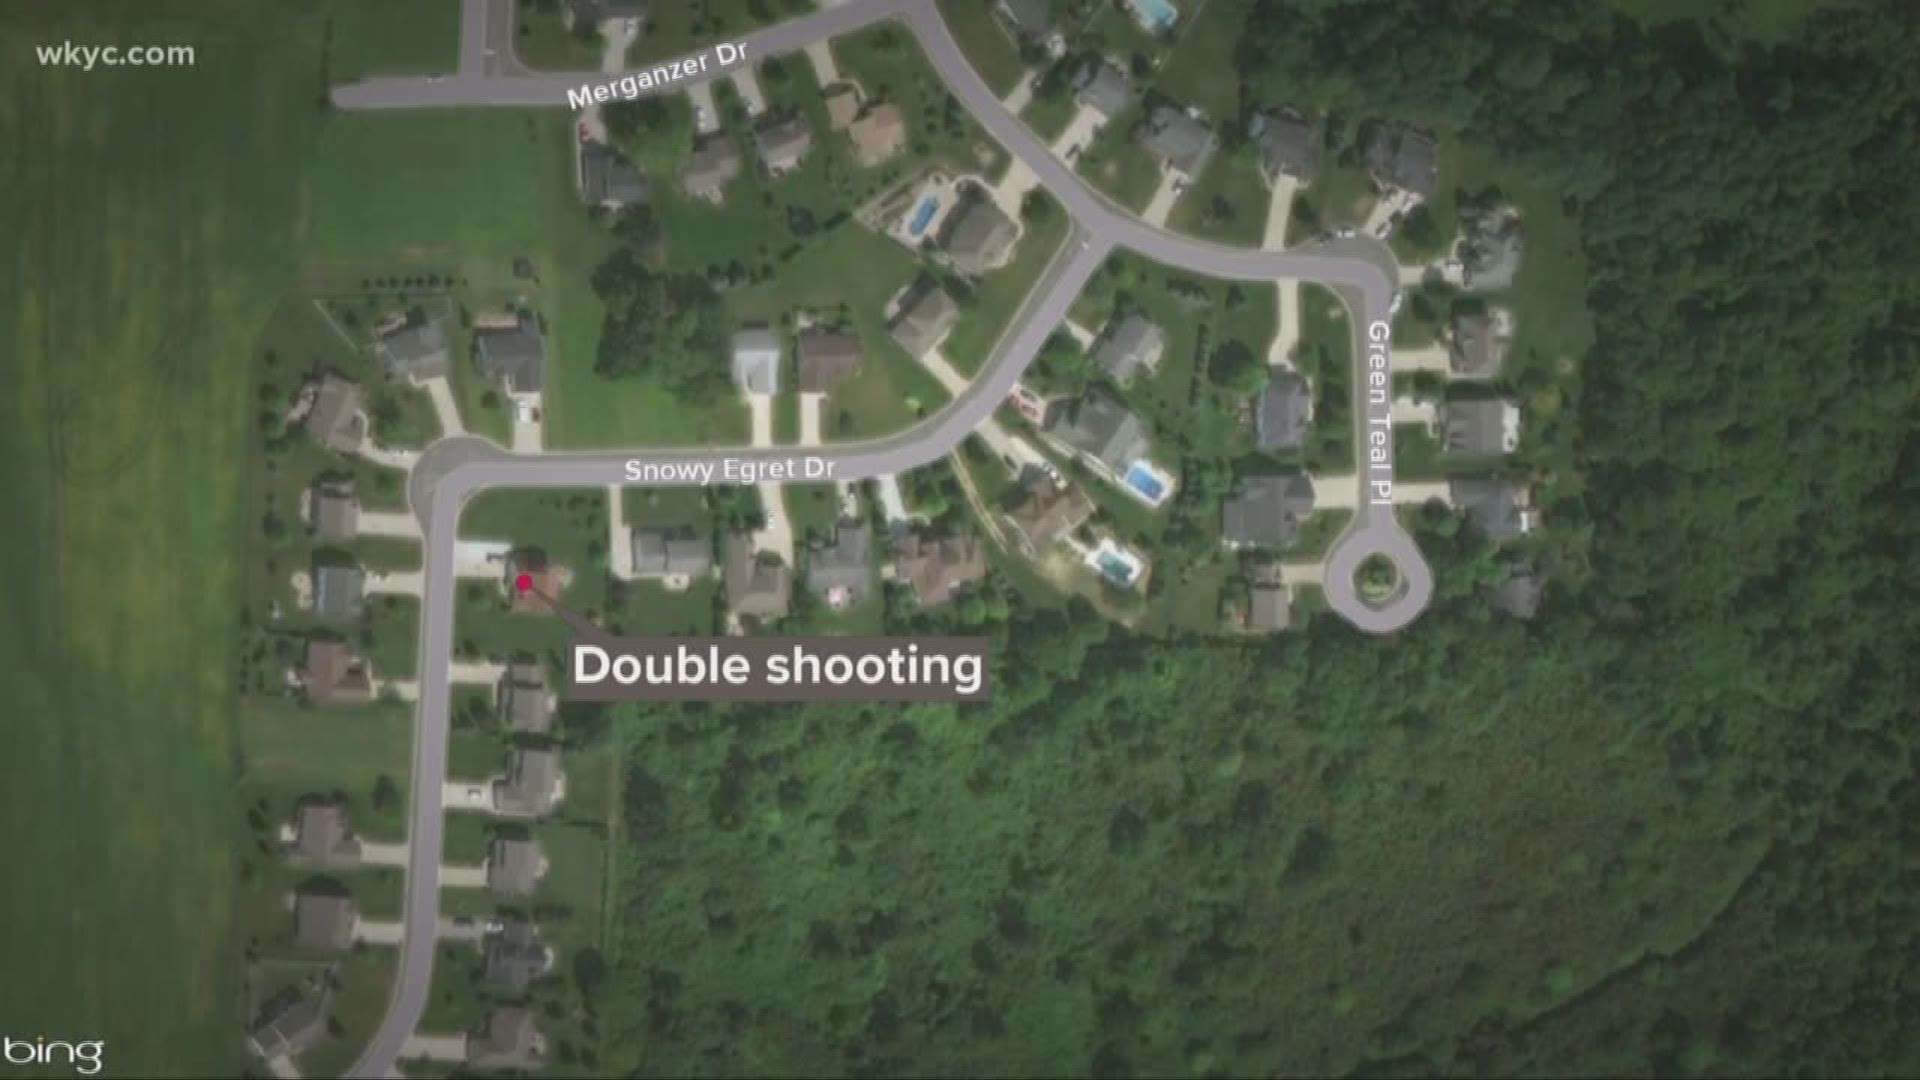 June 6, 2019: A 44-year-old woman and her 16-year-old son are dead following a shooting at a Huron Township home, which authorities are investigating as a possible murder-suicide. It was around 10 p.m. Monday when officers received a 911 call from a 15-year-old boy who returned home and found his mom and brother with gunshot wounds.